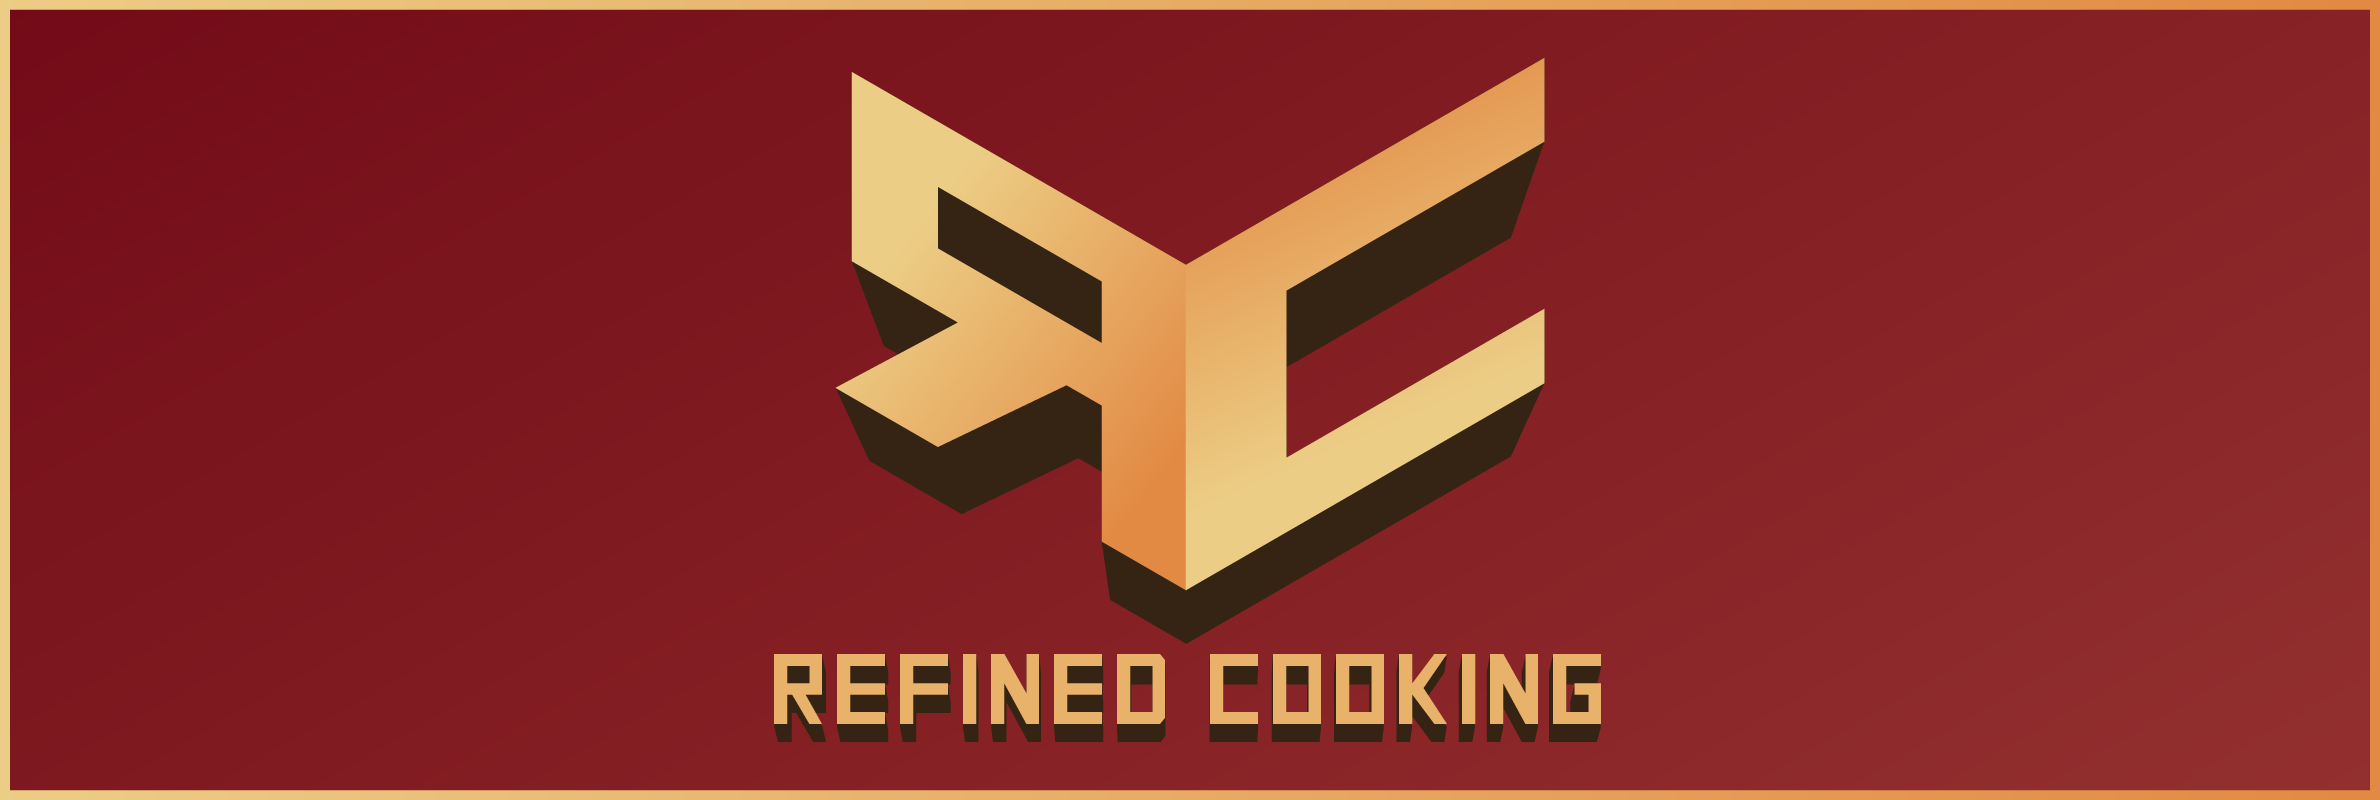 Refined Cooking Header